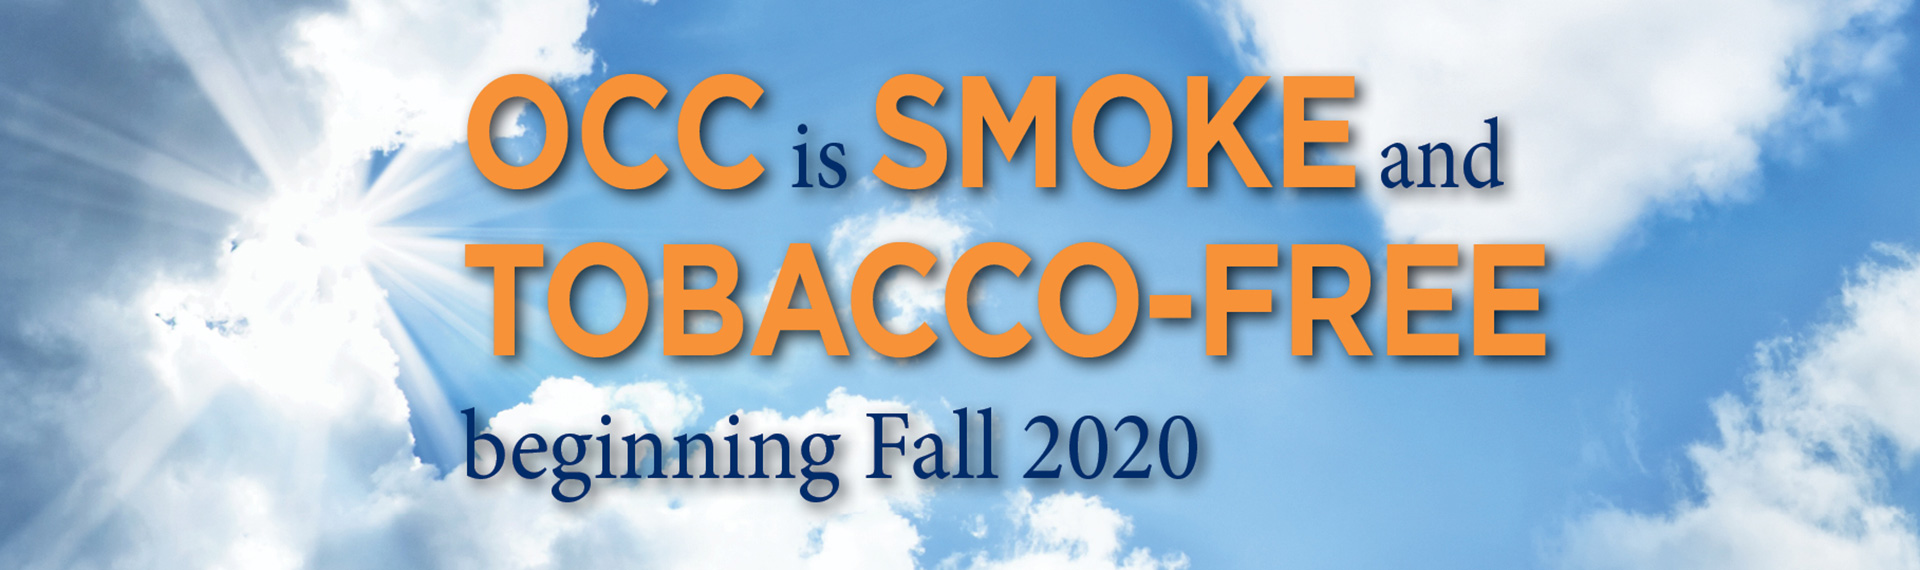 OCC is Smoke & Tobacco-Free Campus starting Fall 2020. Background of clear blue skies